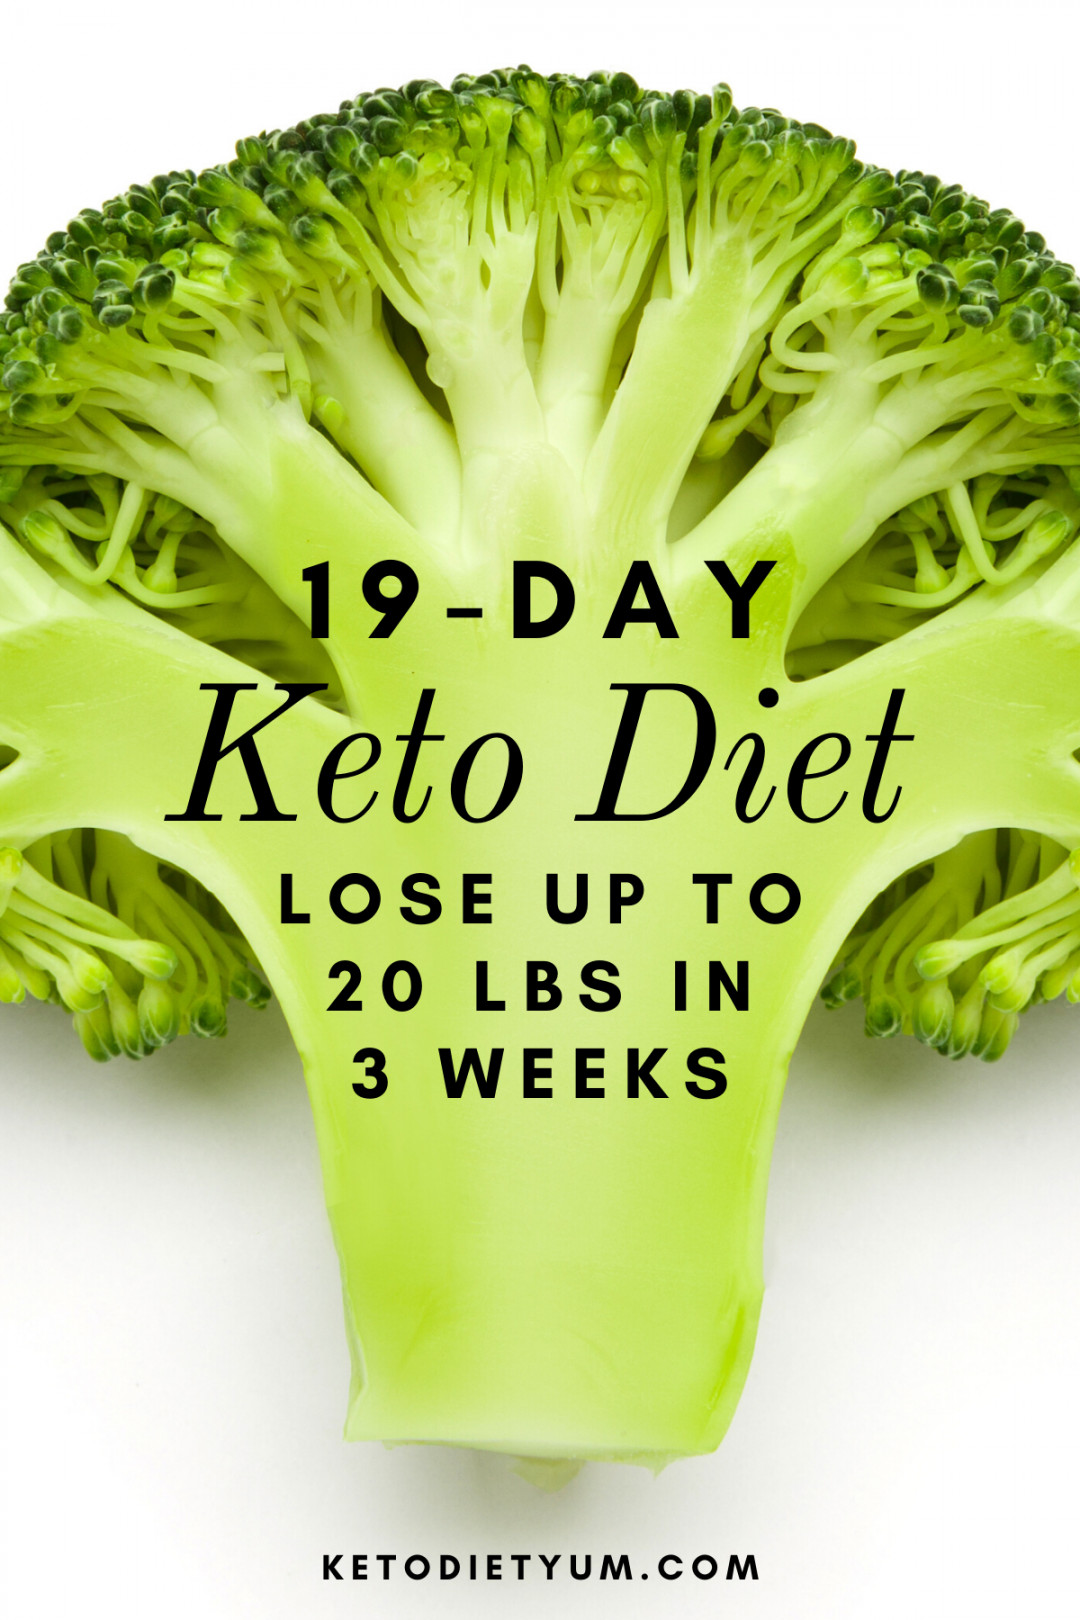 19 Days Keto Diet Plan
 19 Day Keto Diet Plan for Beginners Weight Loss Yummy